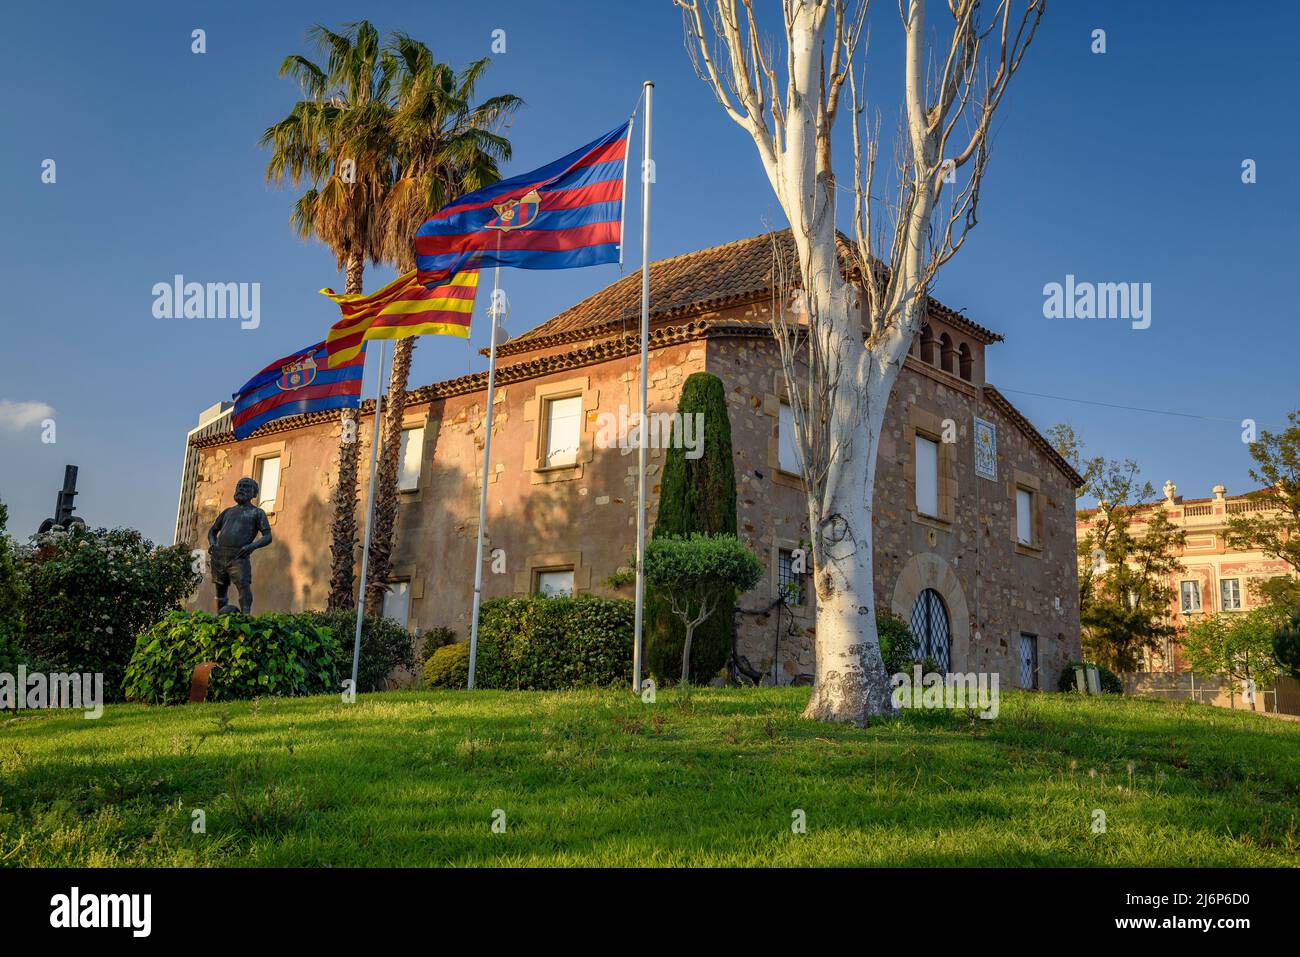 La Masia, former residence of the young soccer players of the FC Barcelona youth academy, located next to the Camp Nou (Barcelona, Catalonia, Spain) Stock Photo